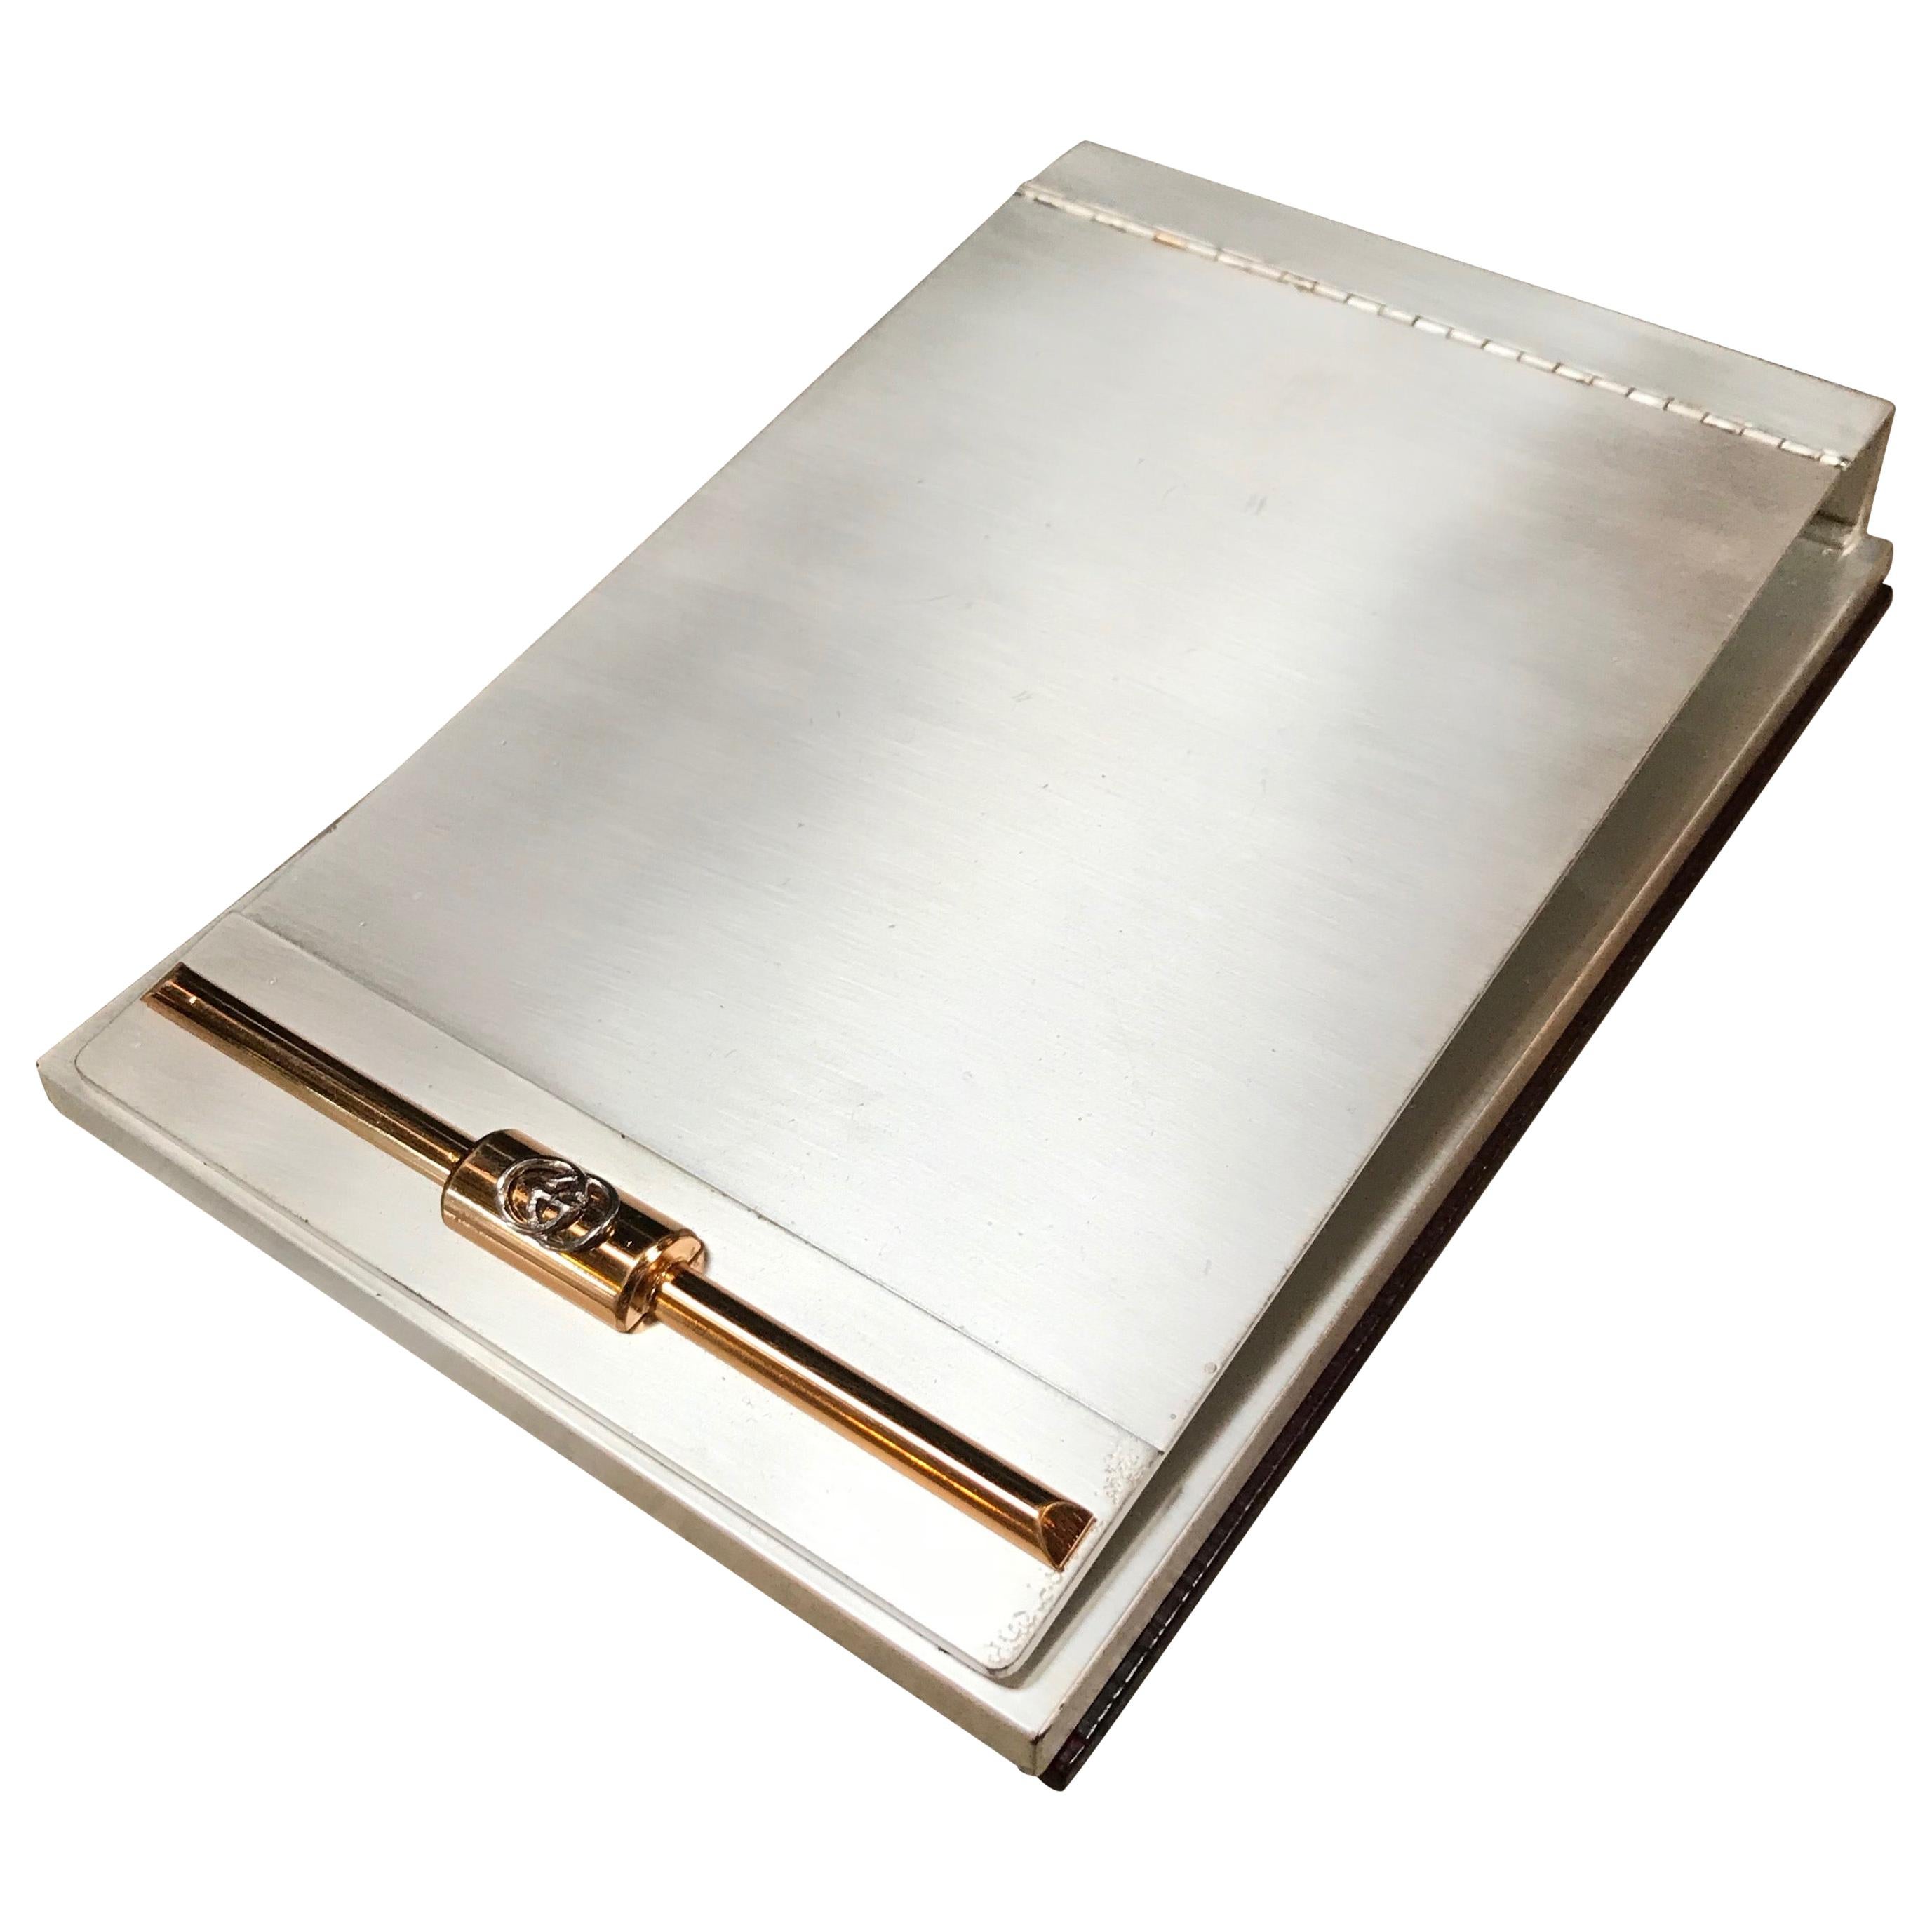 Gucci Agenda - 4 For Sale on 1stDibs | gucci planner, gucci agenda cover,  gucci notebook cover